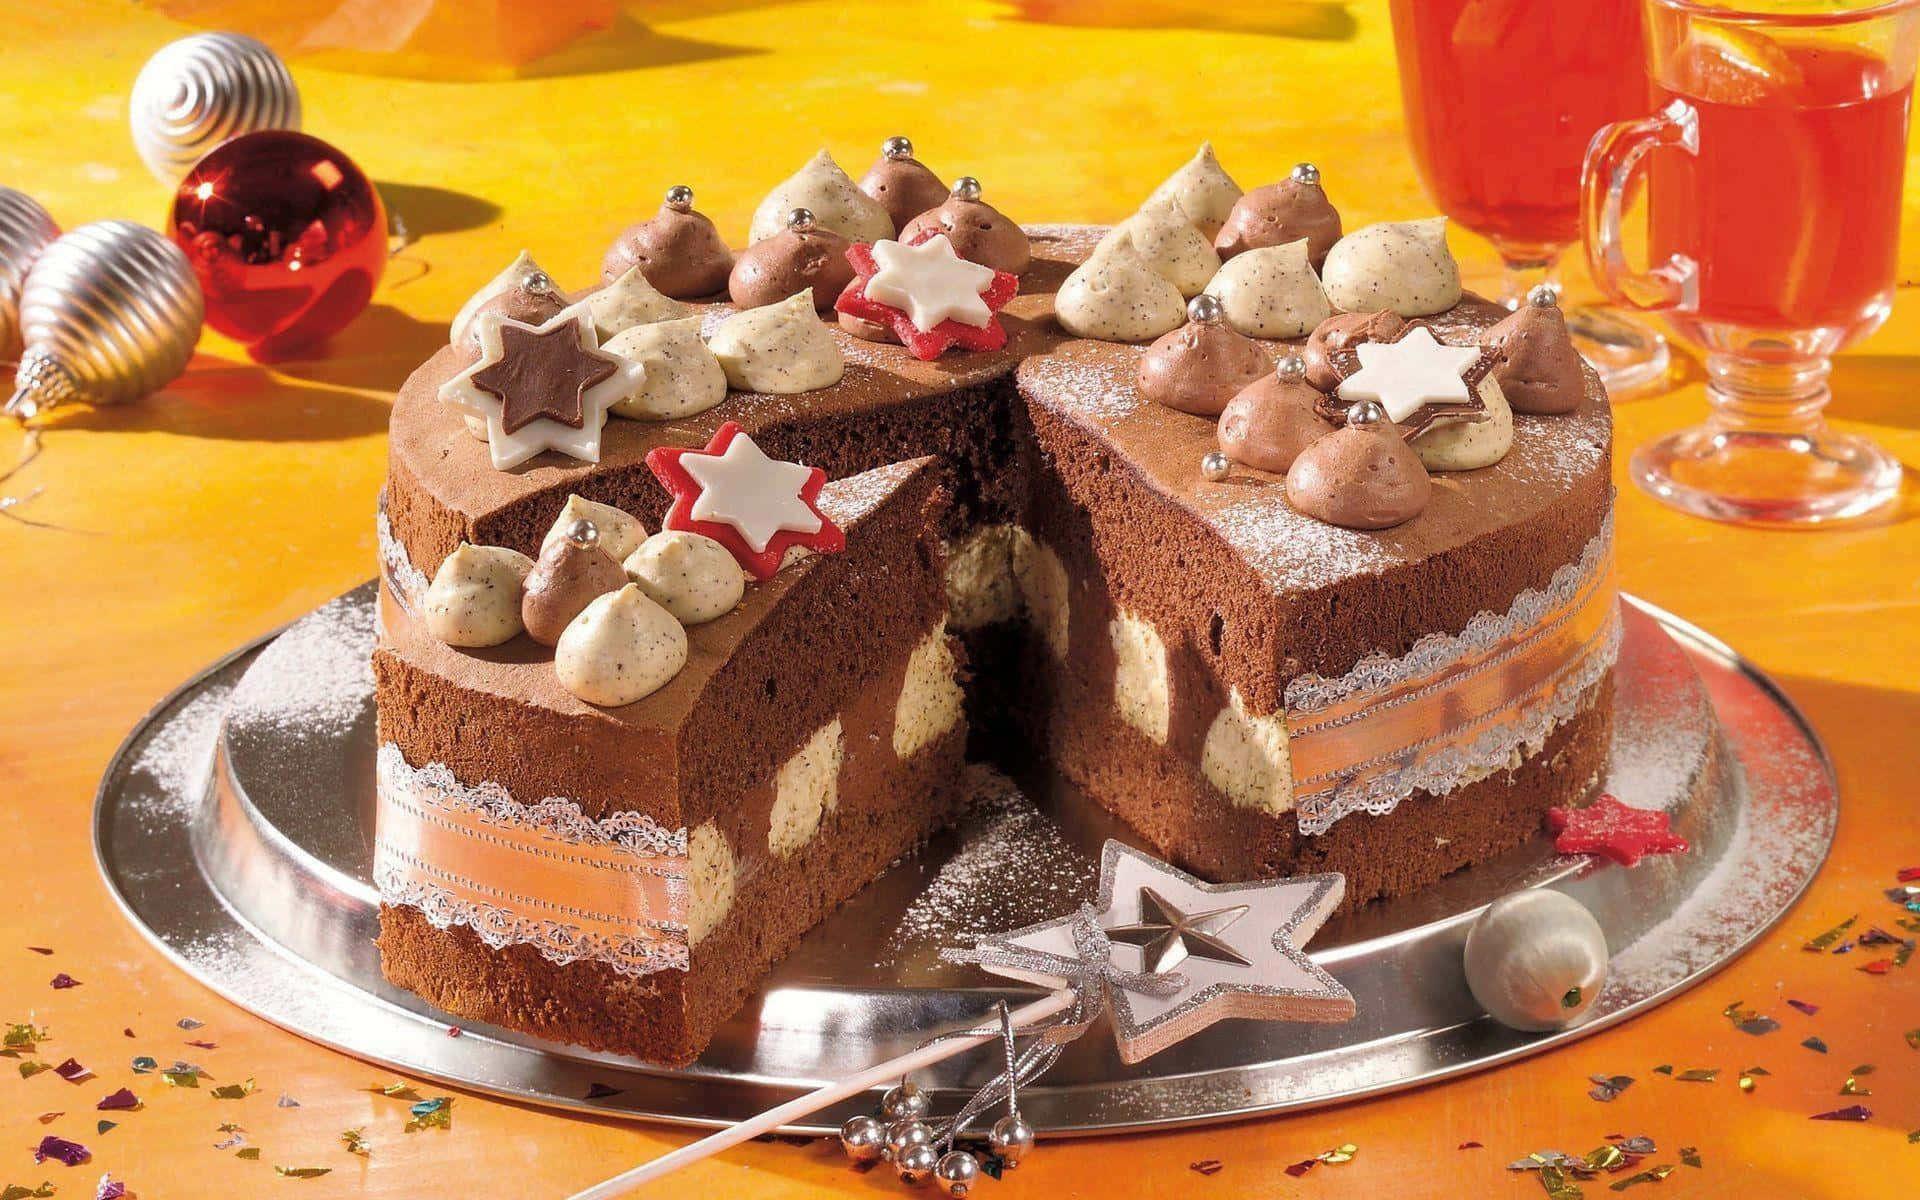 Indulge in a slice of decadent chocolate cake!